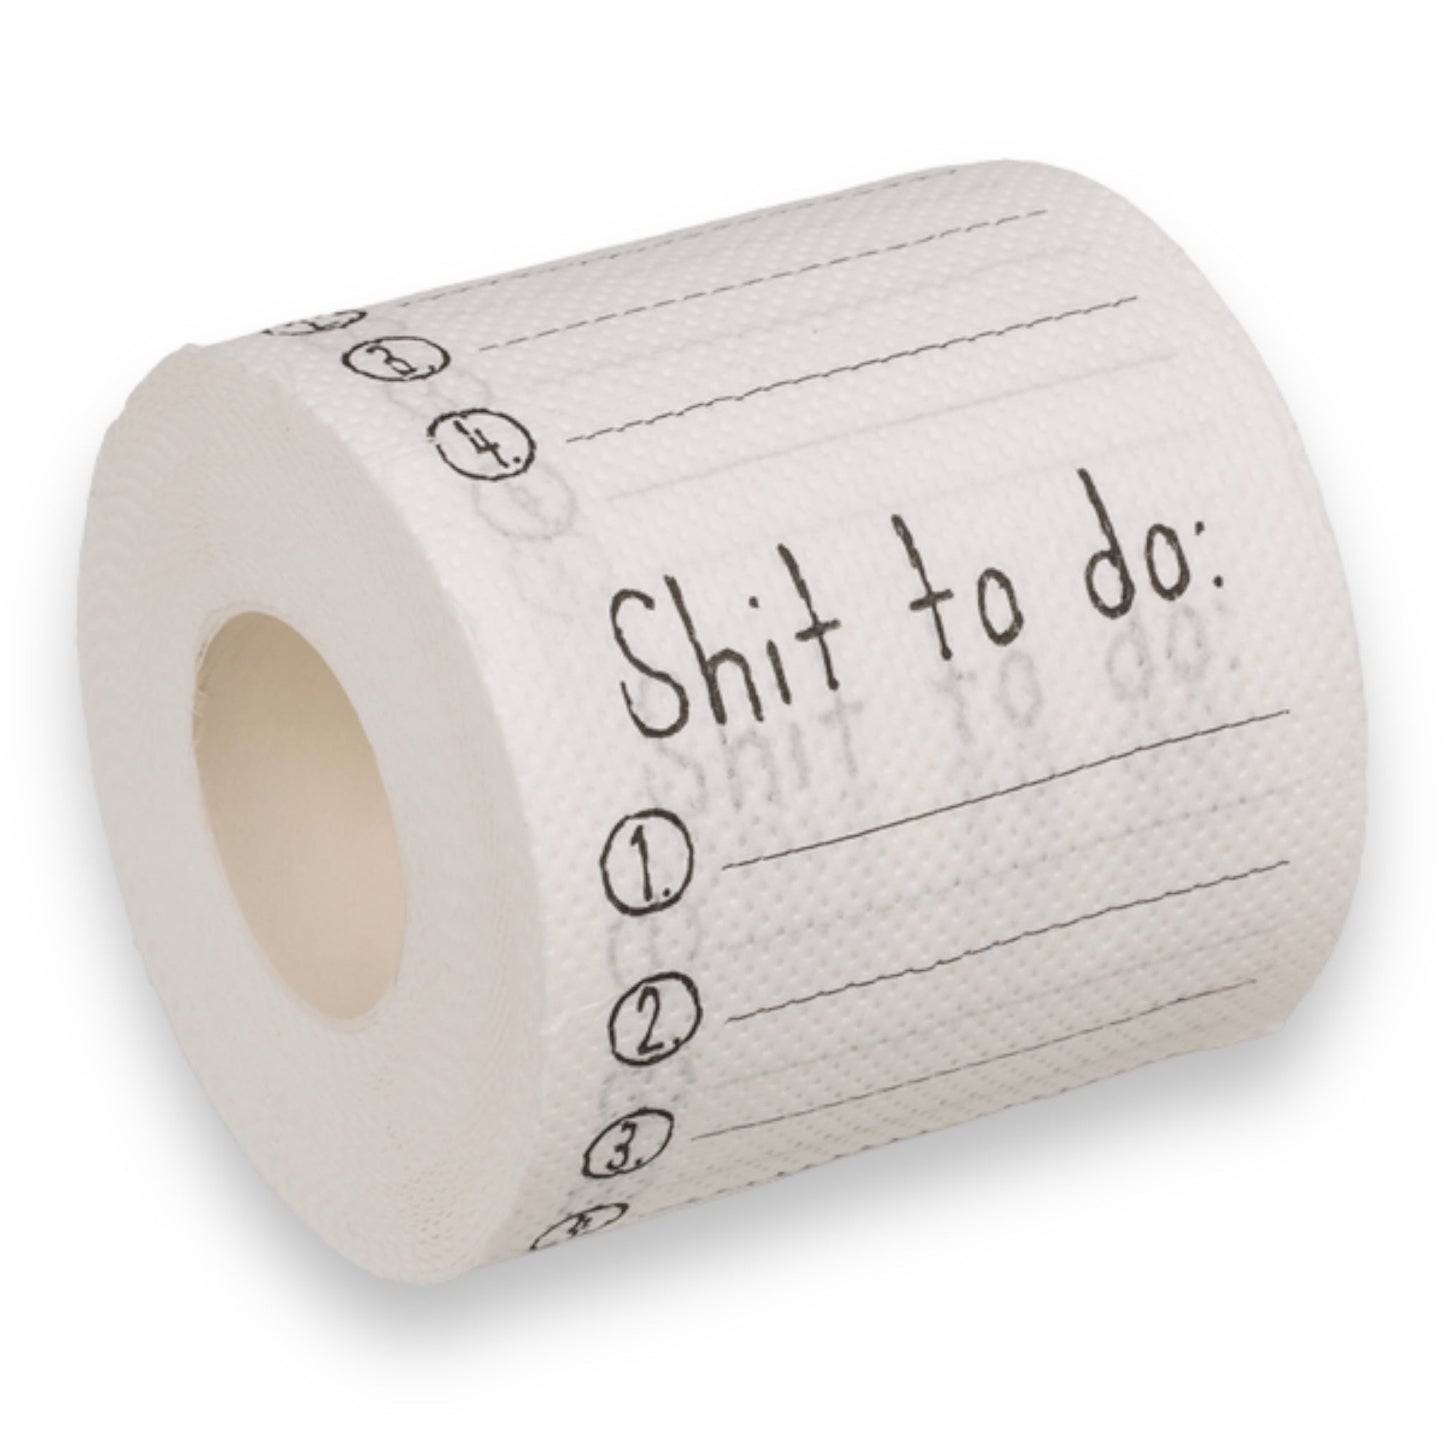 Toilet roll - Shit To Do - White - Never Forget a Memory again